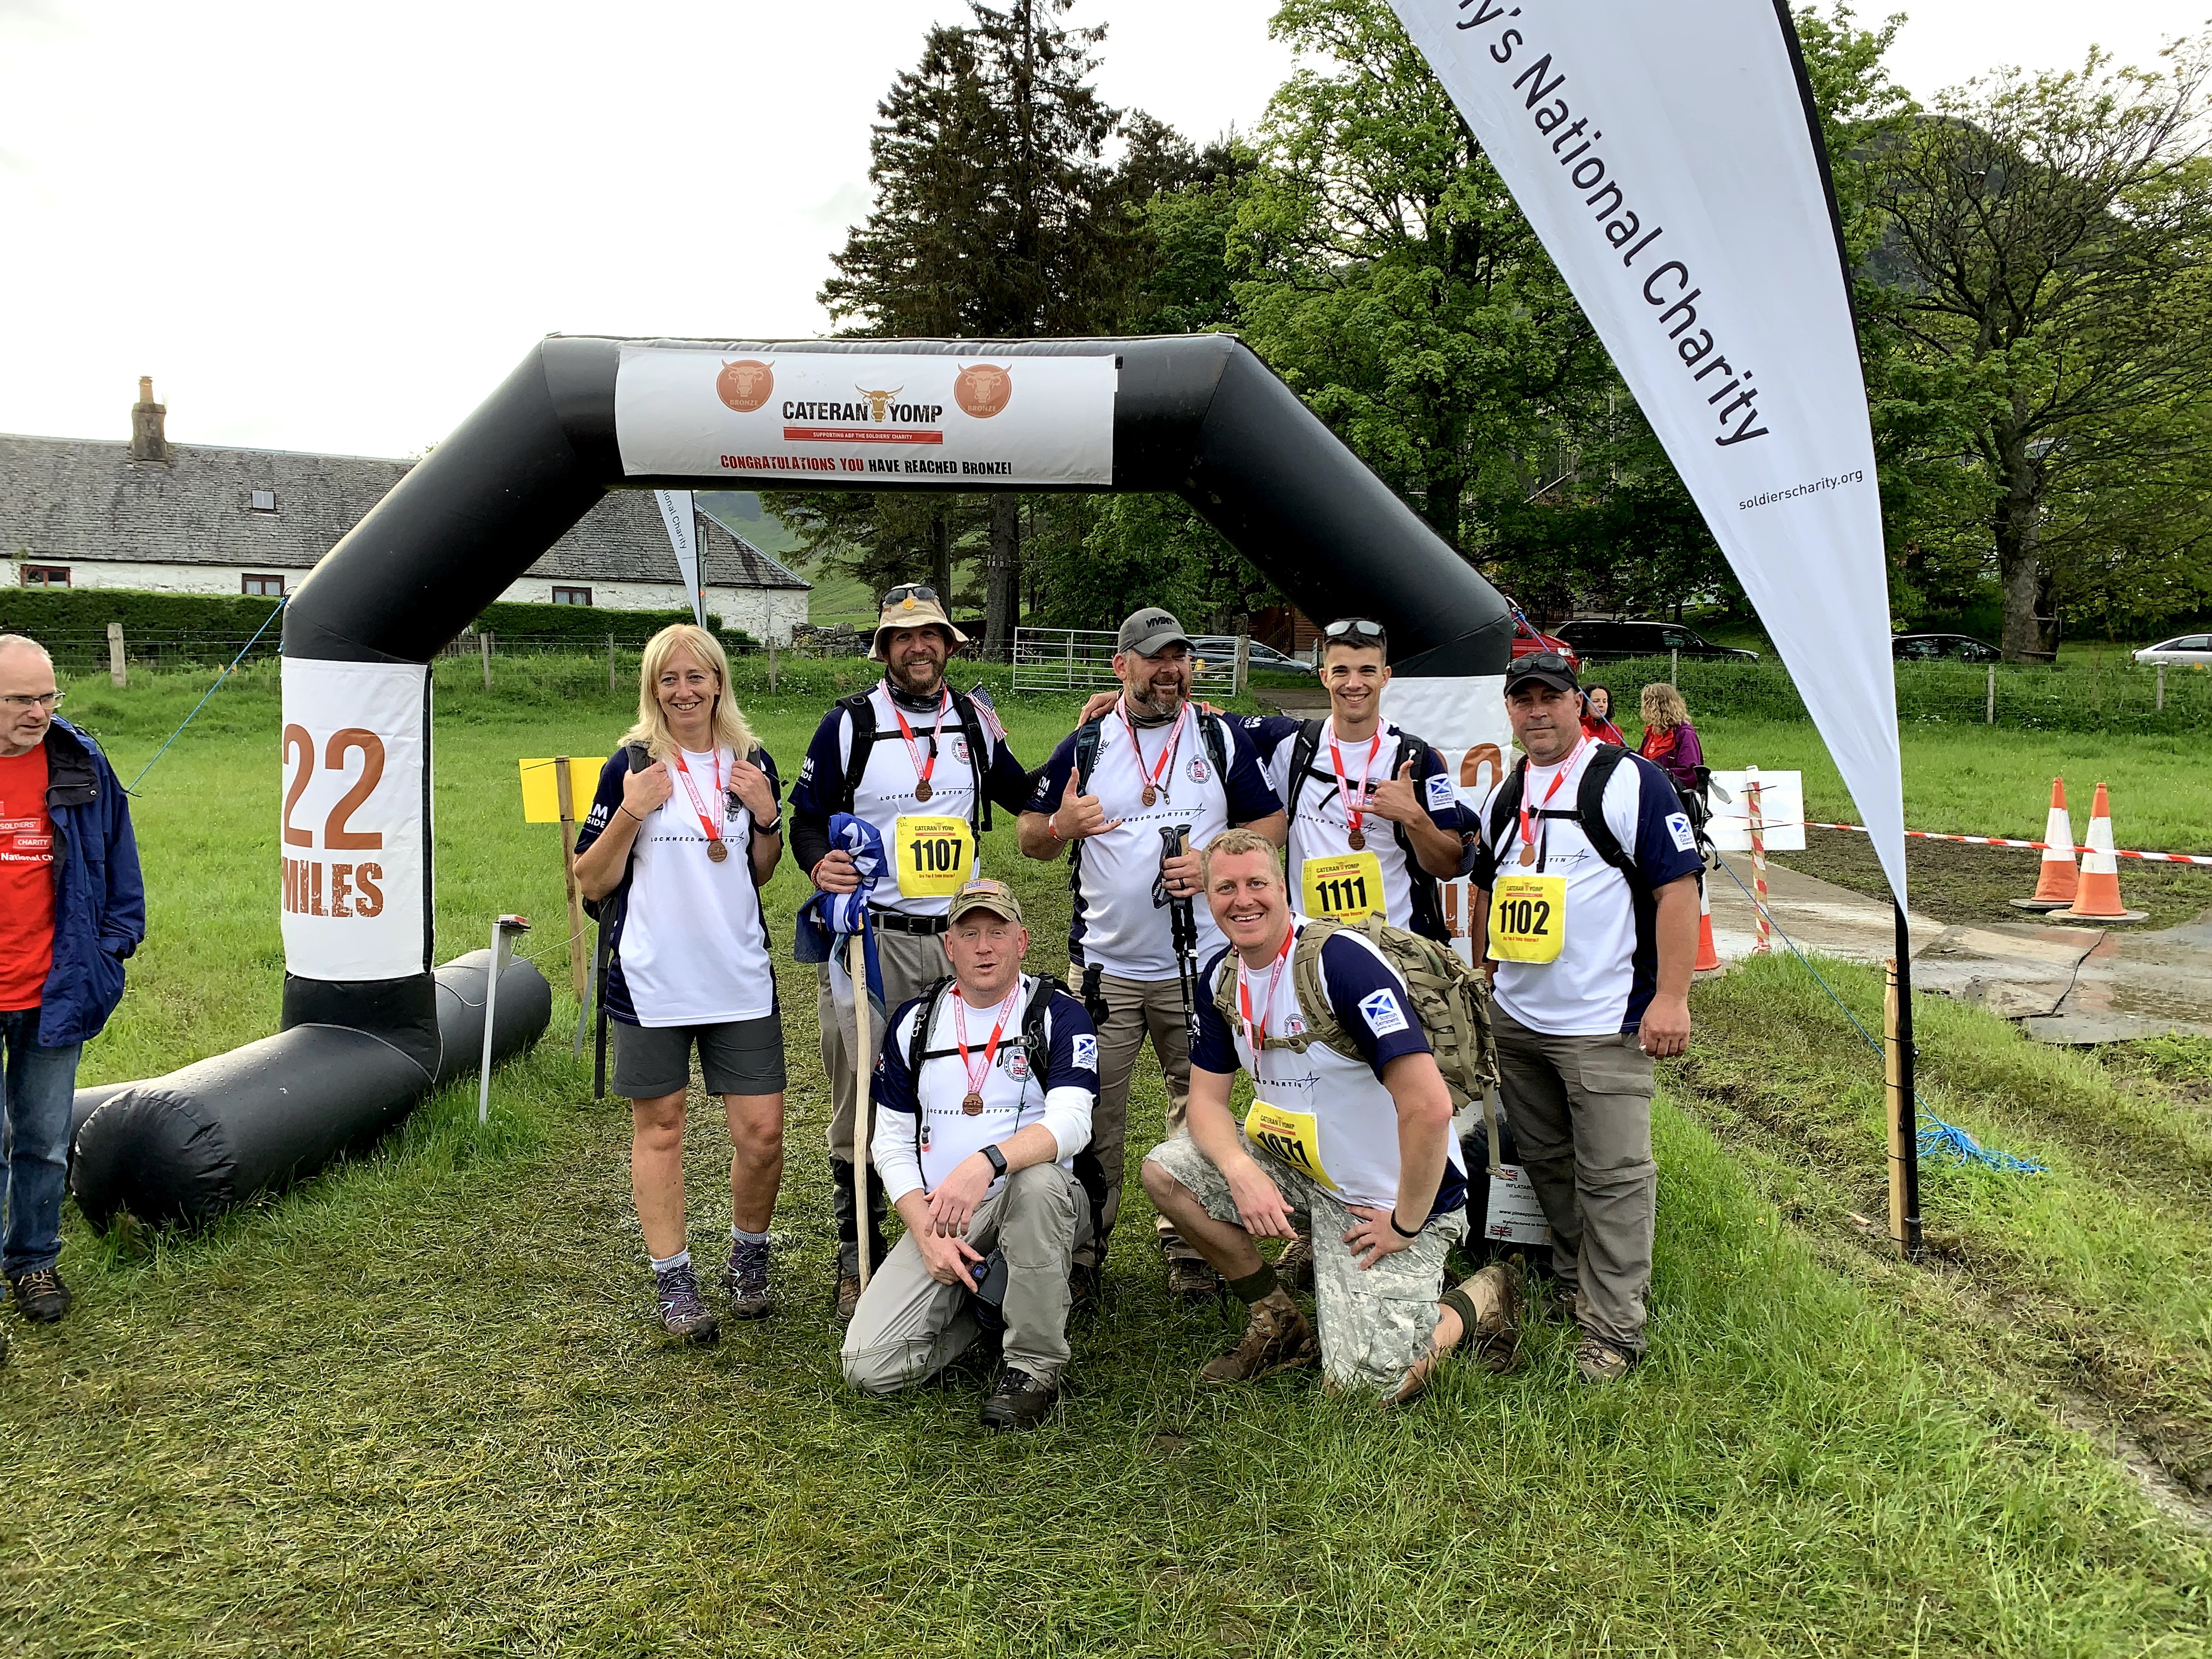 Medic with a team completing 22 miles of the Cateran Yomp